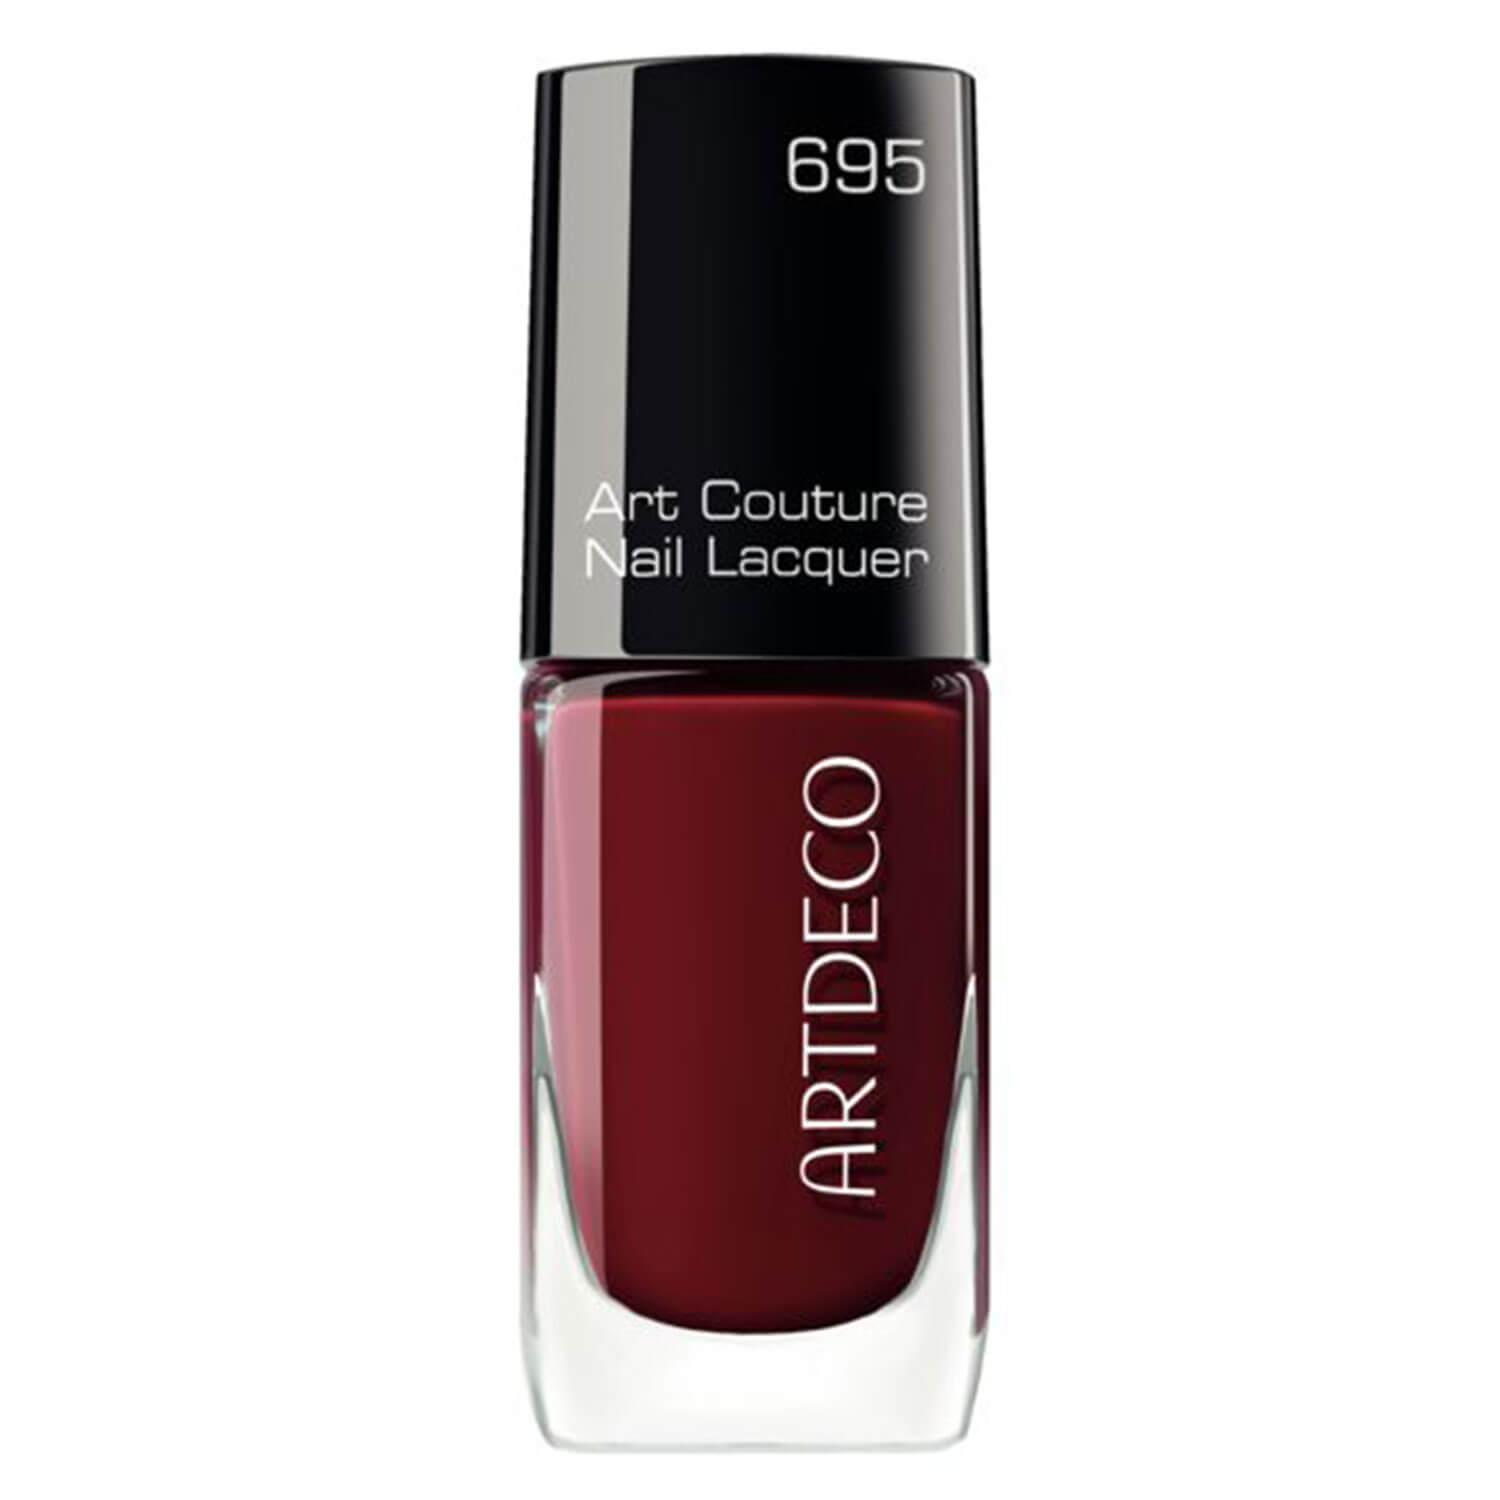 Art Couture - Nail Lacquer Blackberry 695